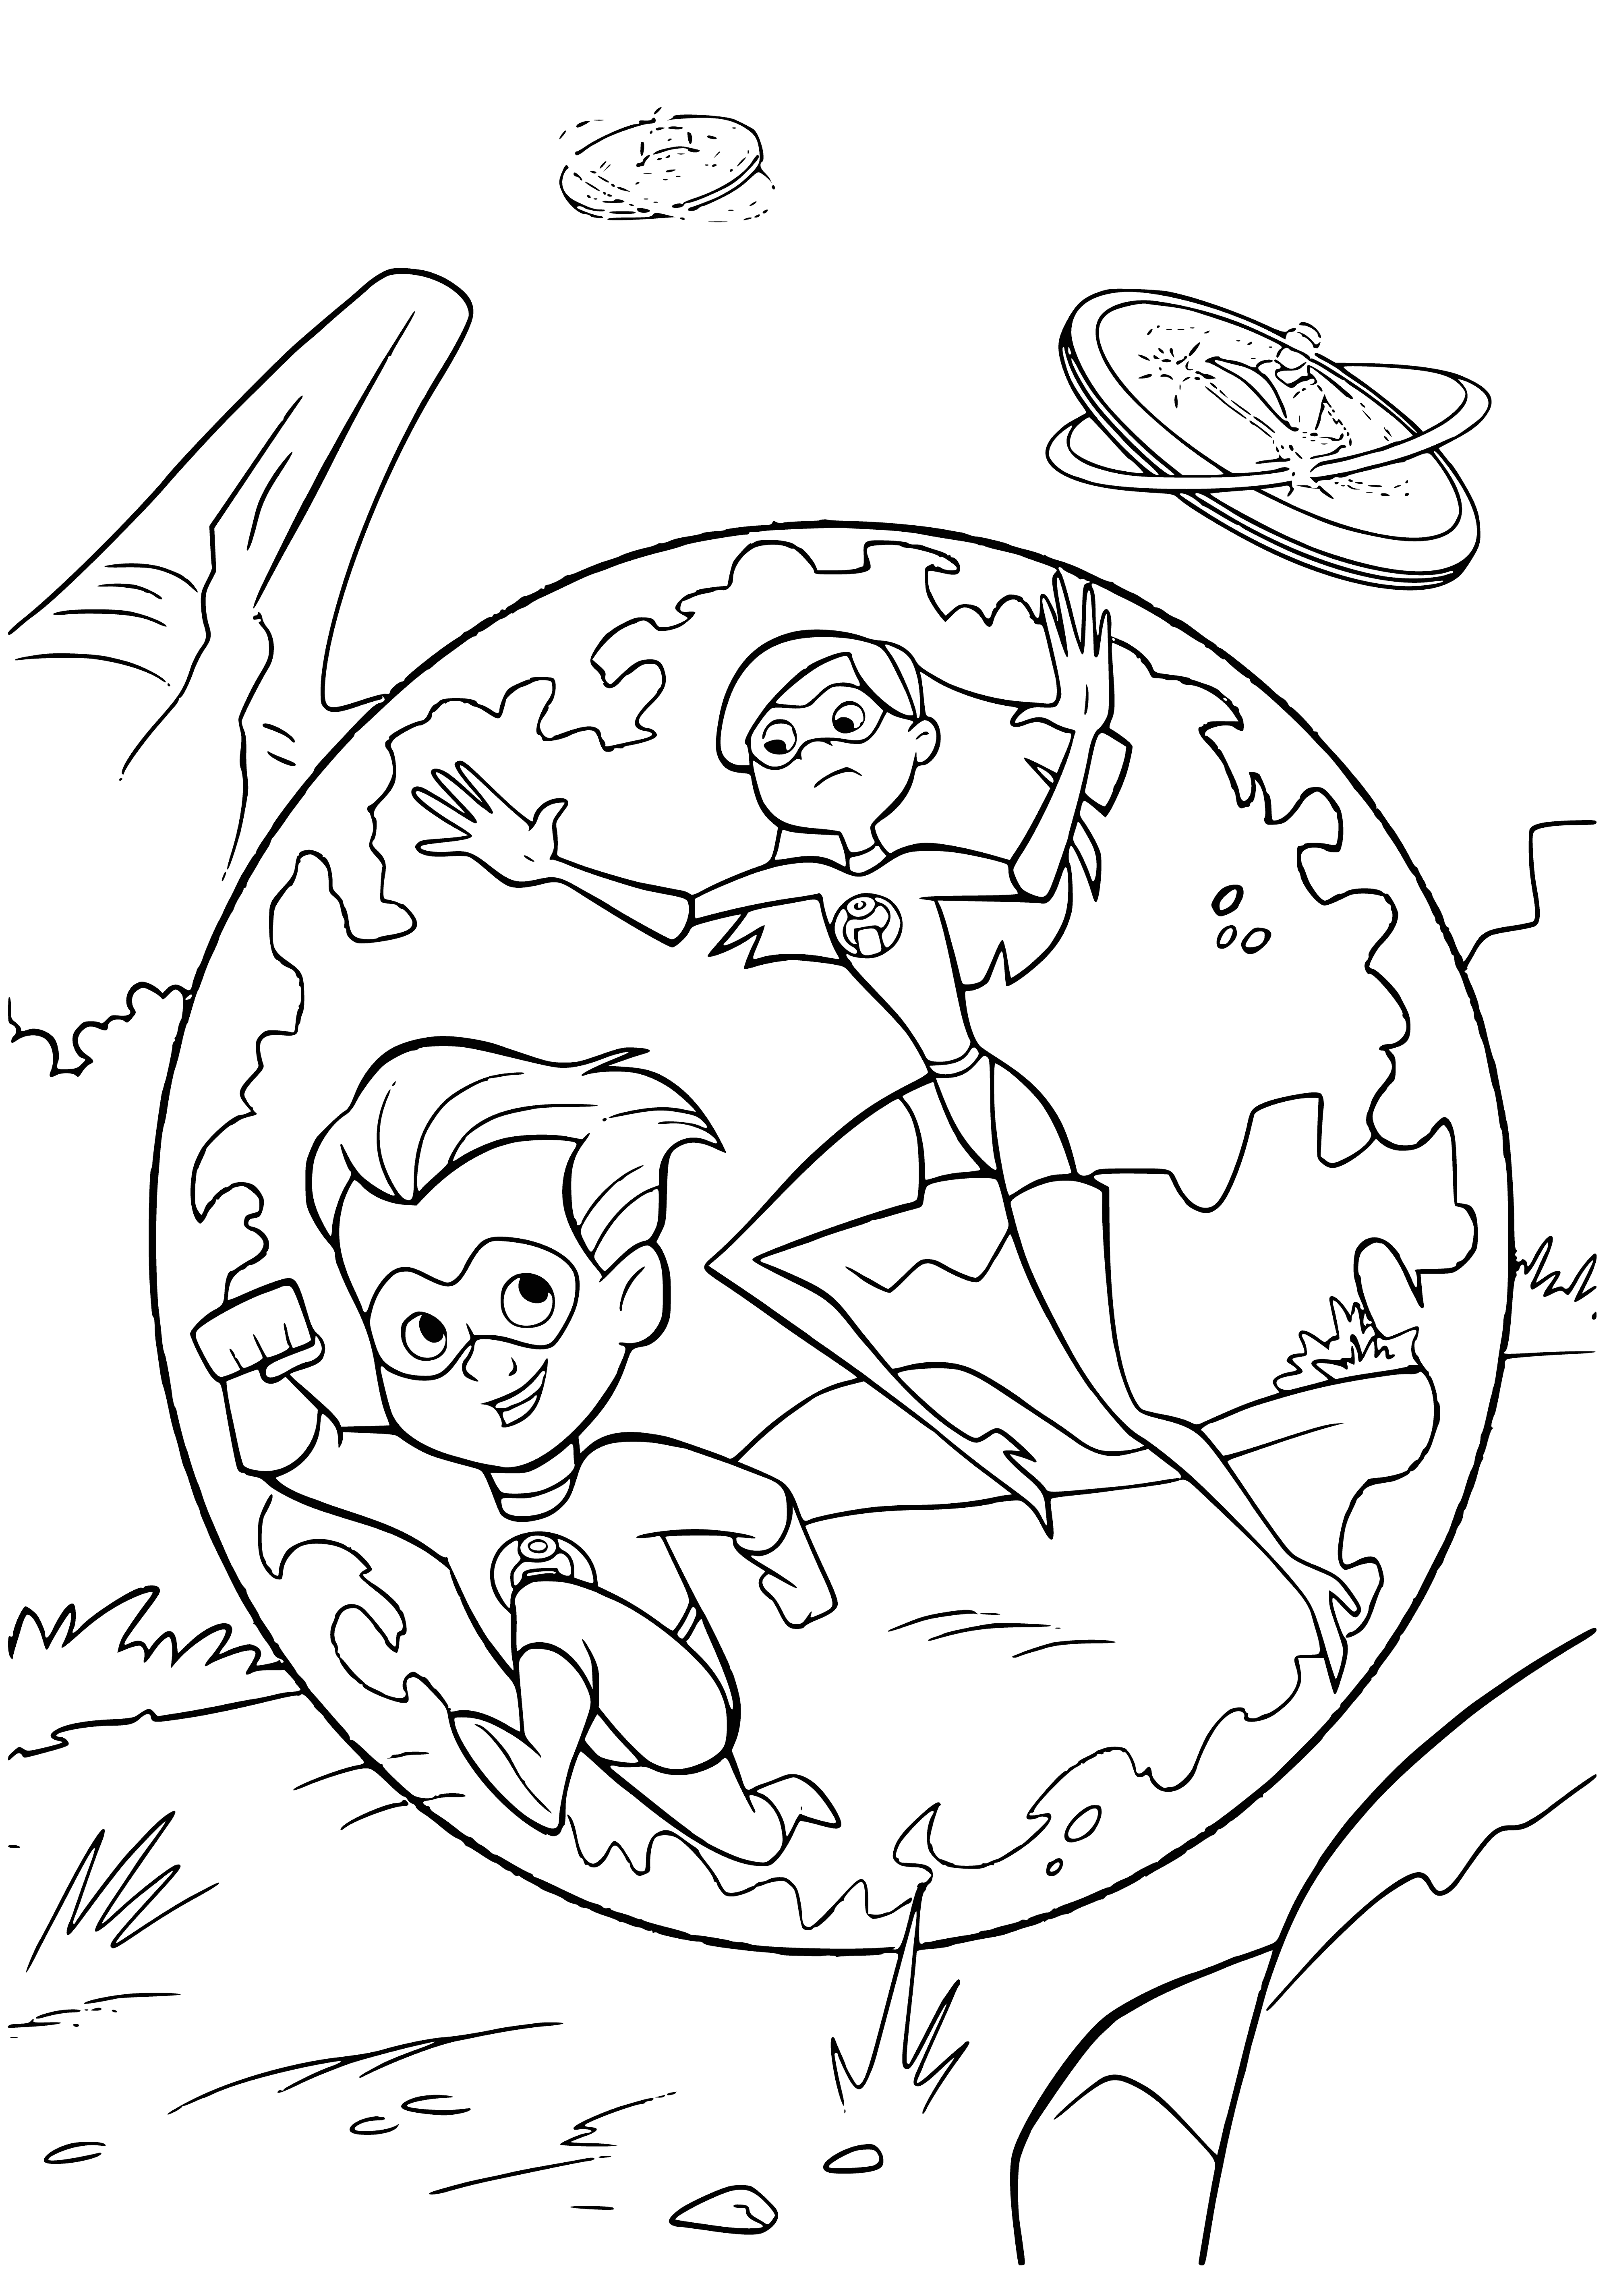 Shastik and Violet coloring page